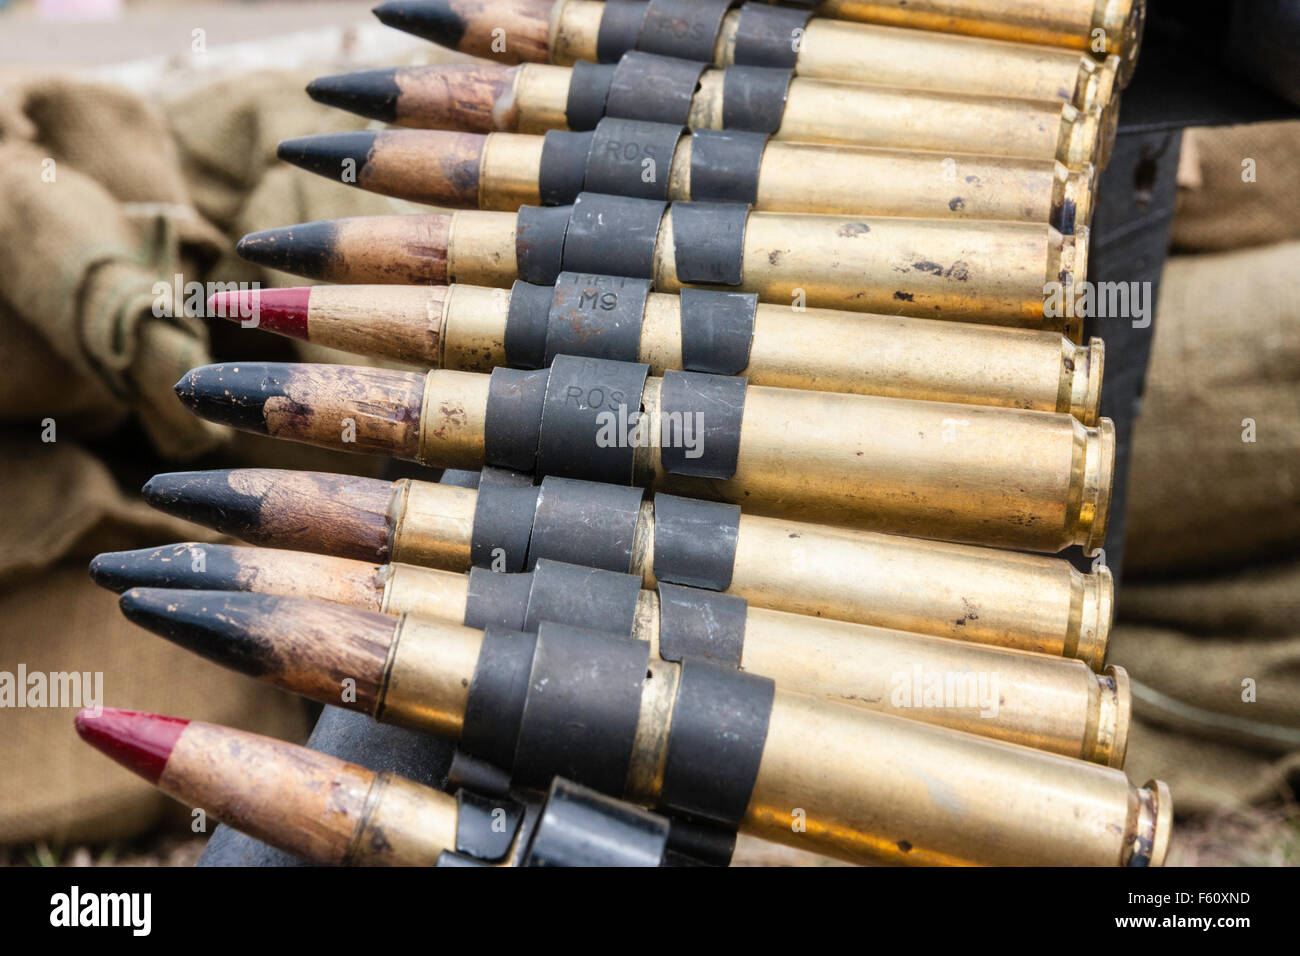 Belt of machine gun bullets, every fifth one a red-tipped armor-piercing incendiary tracer round (M20), four to one tracer. Stock Photo